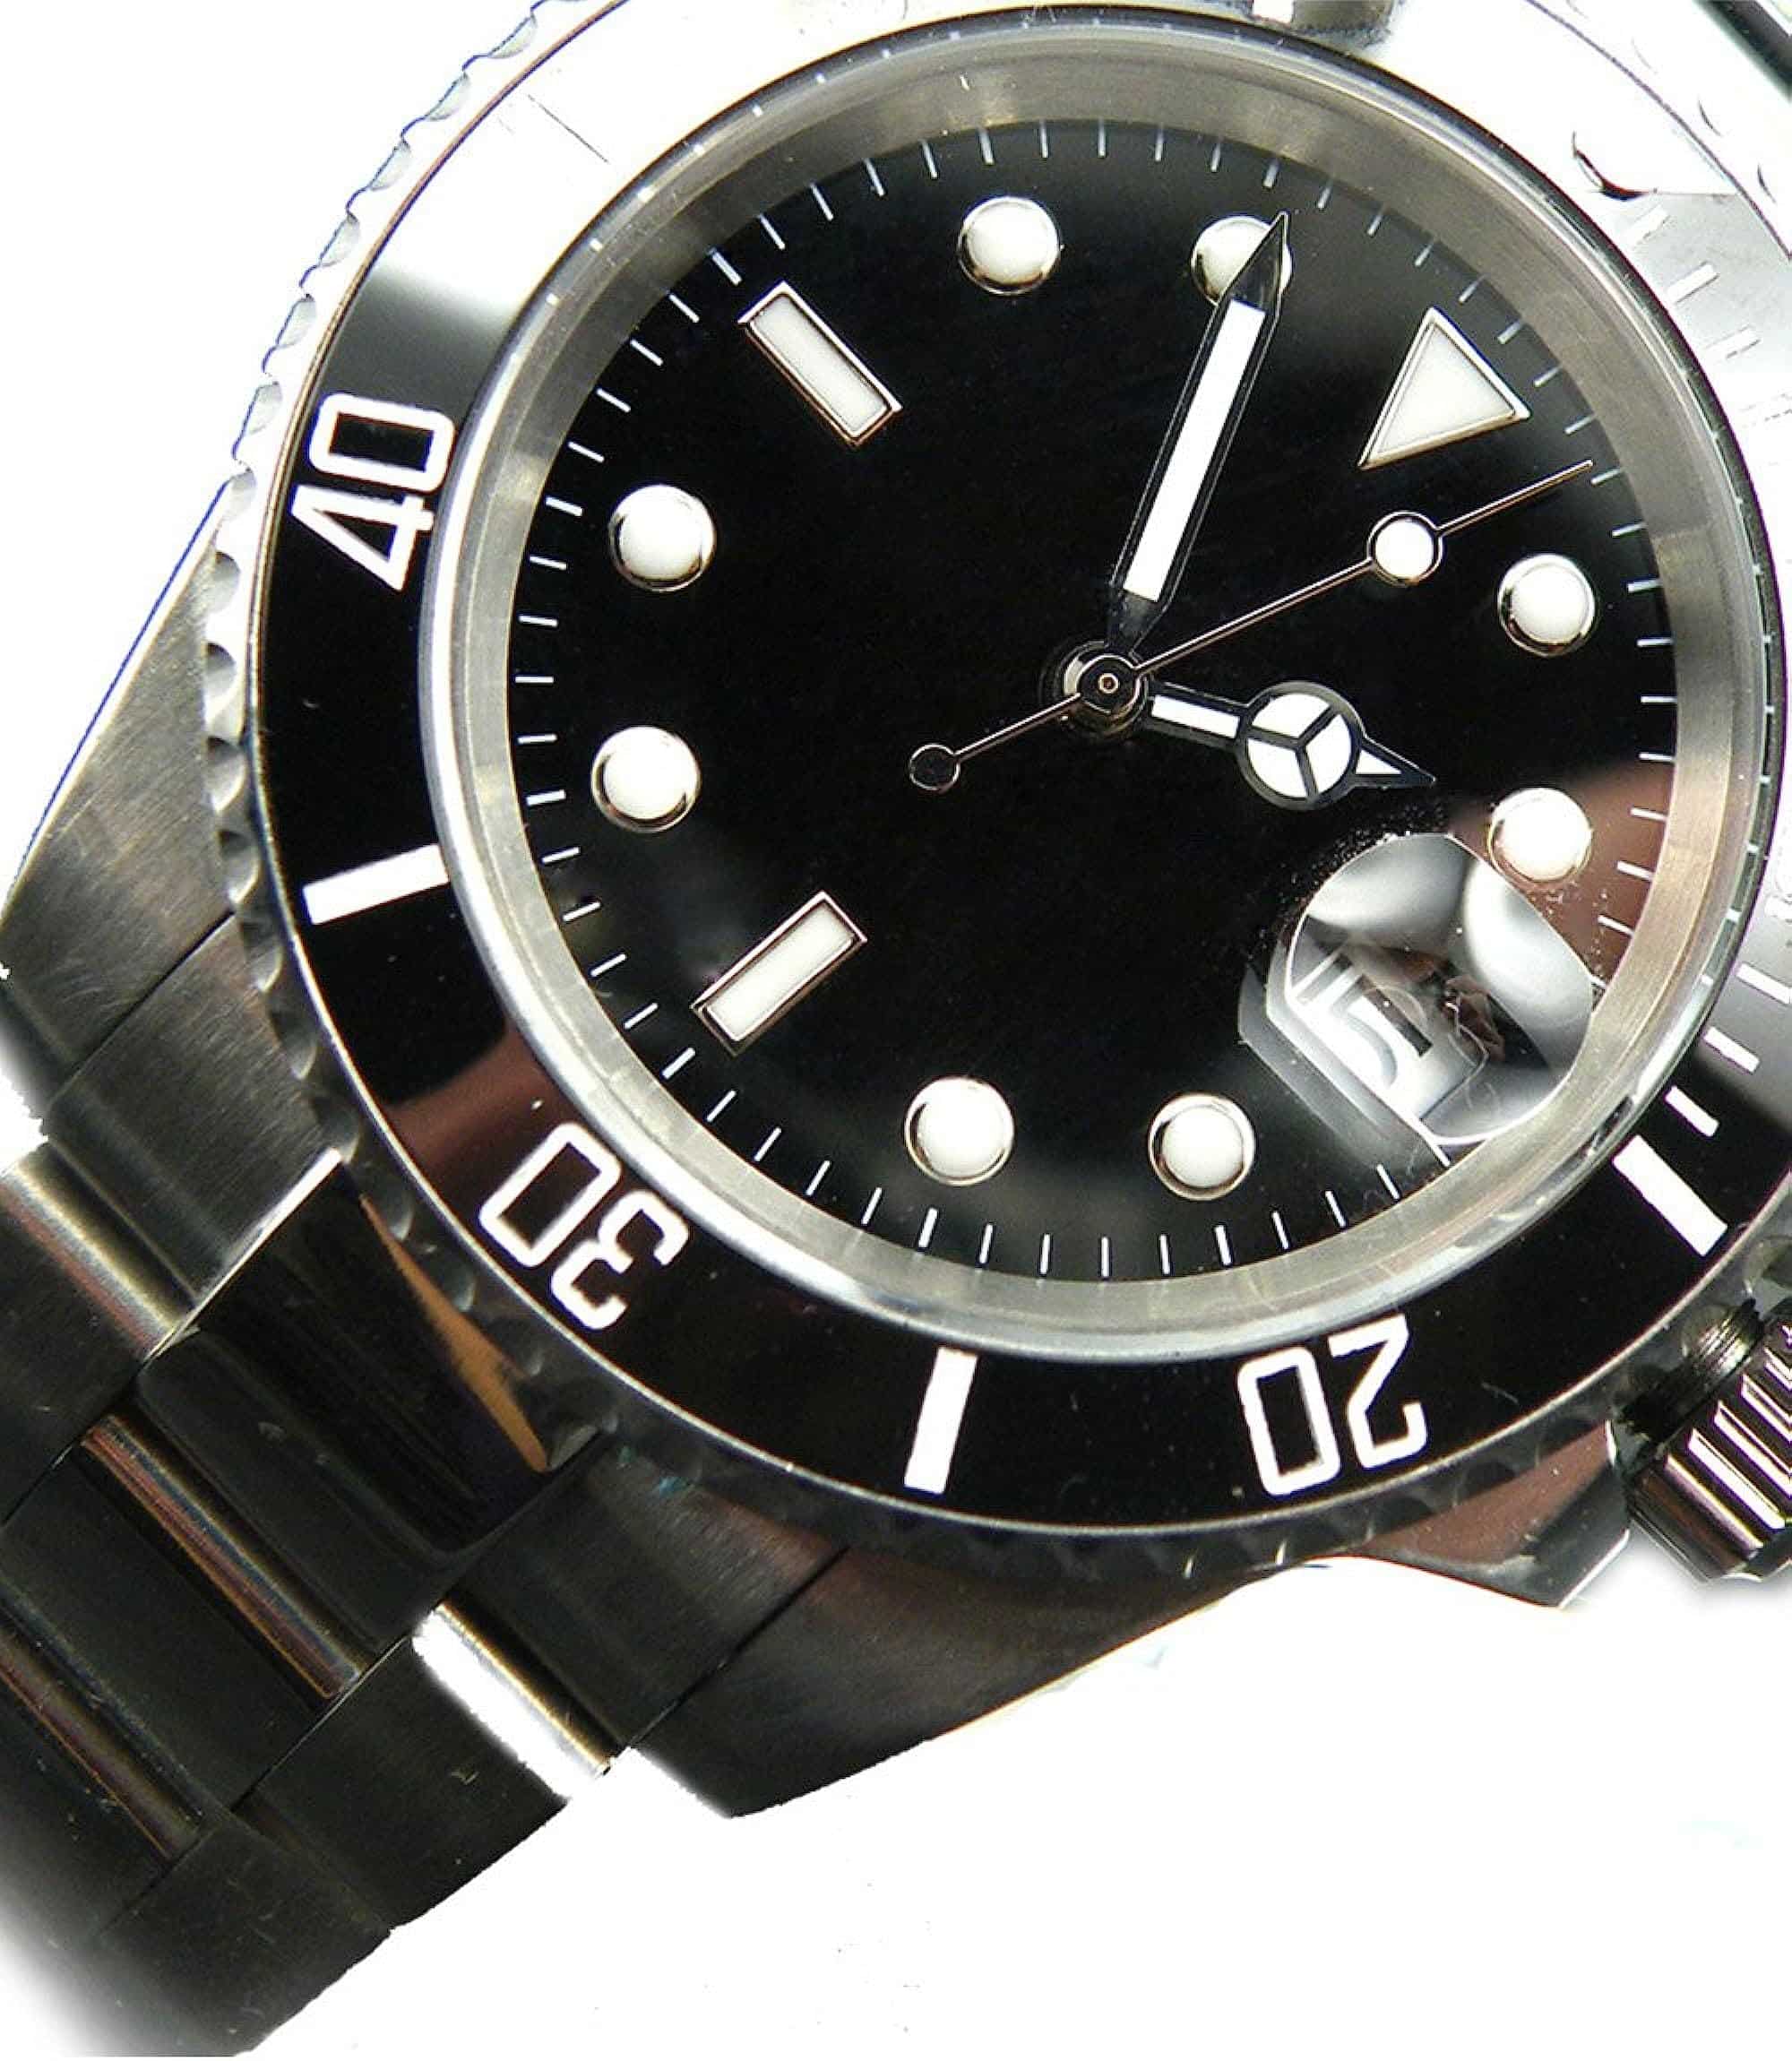 Submariner Homage Sterile Dial